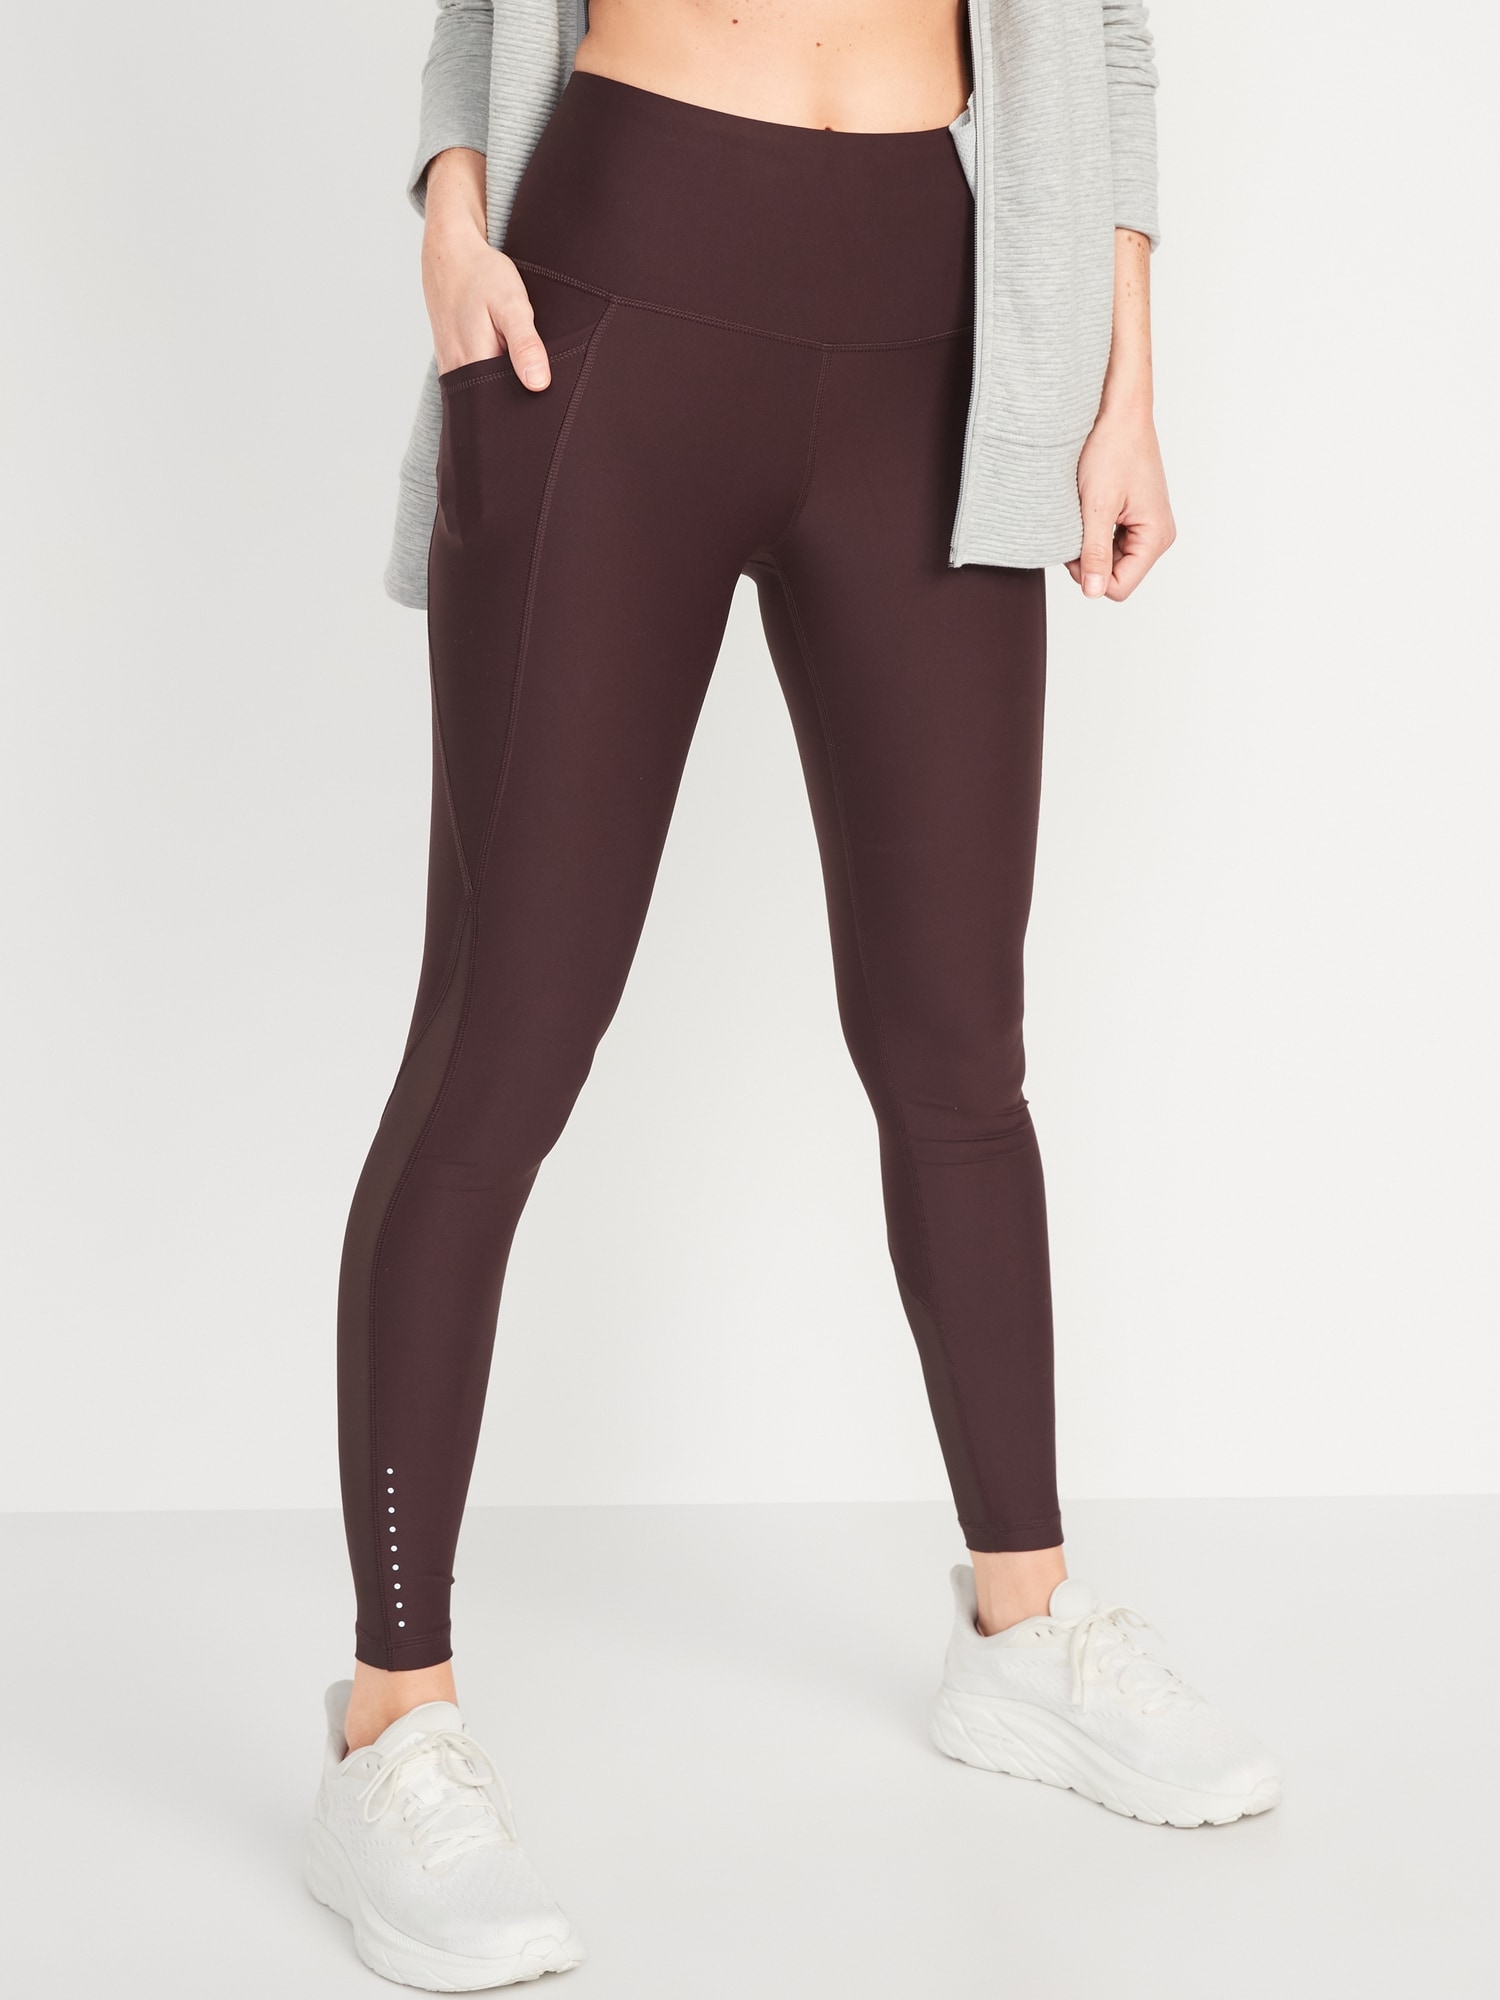 Old Navy High-Waisted PowerSoft Run Leggings for Women red. 1